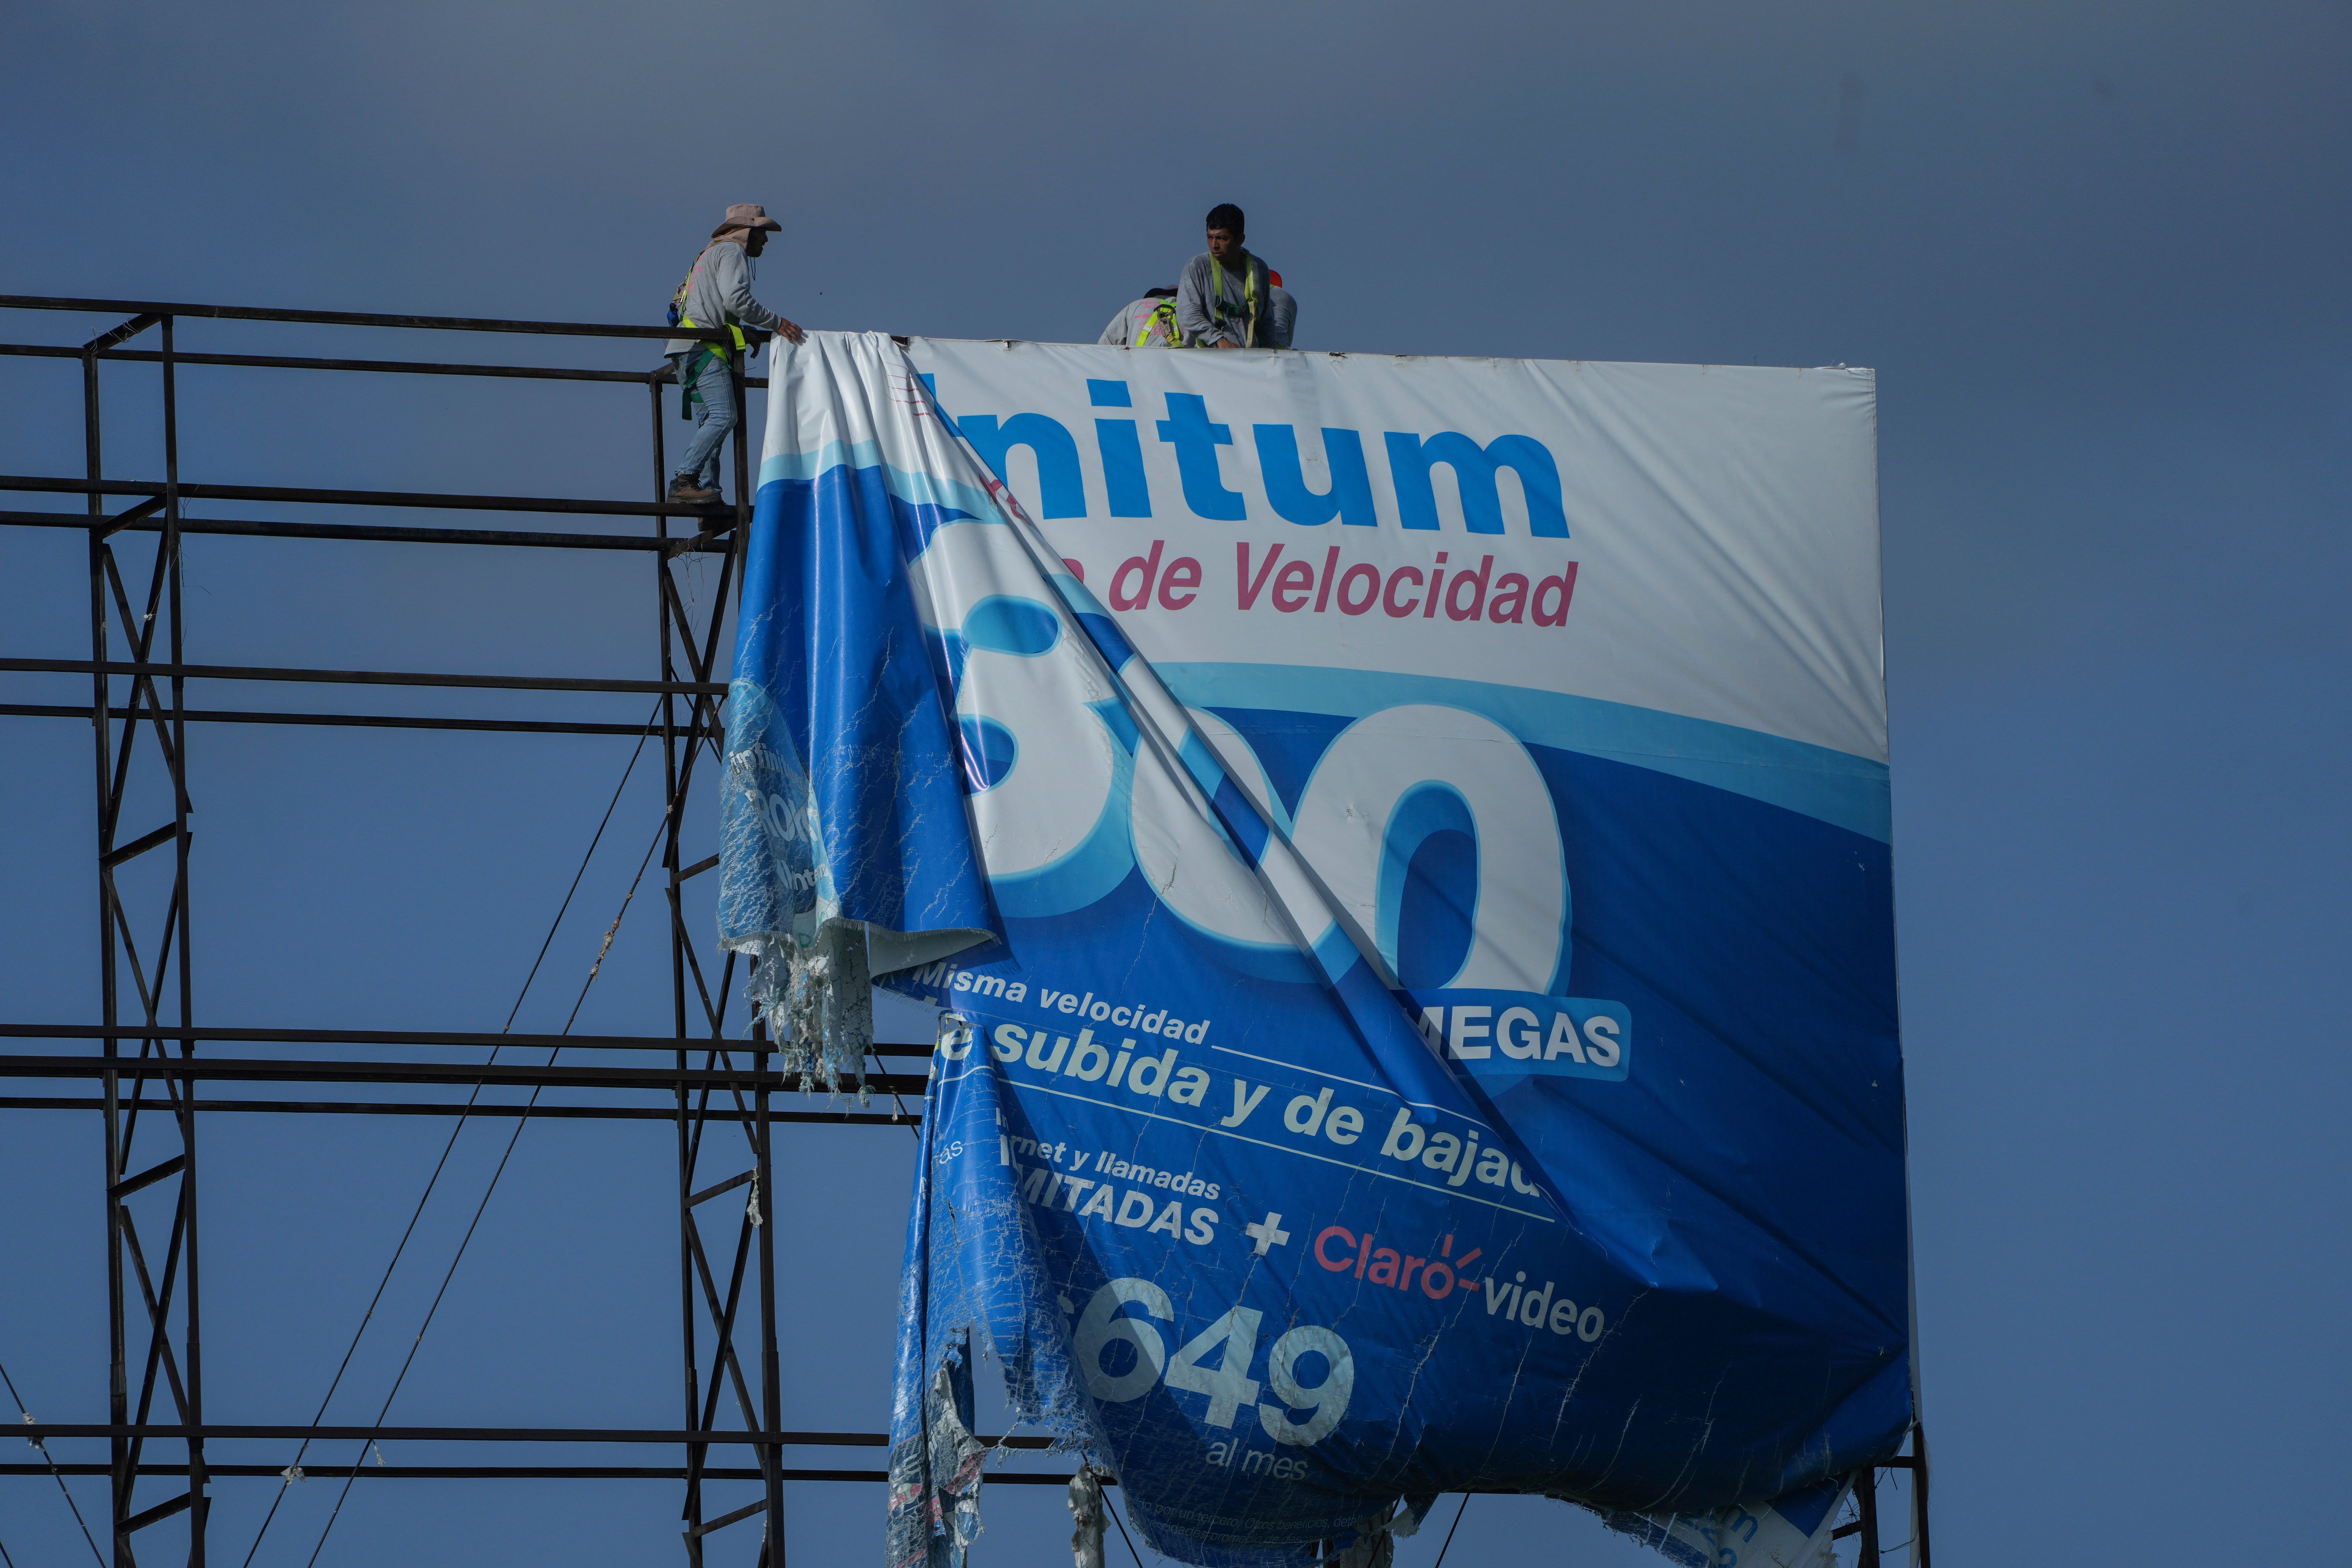 Workers remove a billboard advertisement ahead of Hurricane Beryl in Playa del Carmen, Mexico on July 3